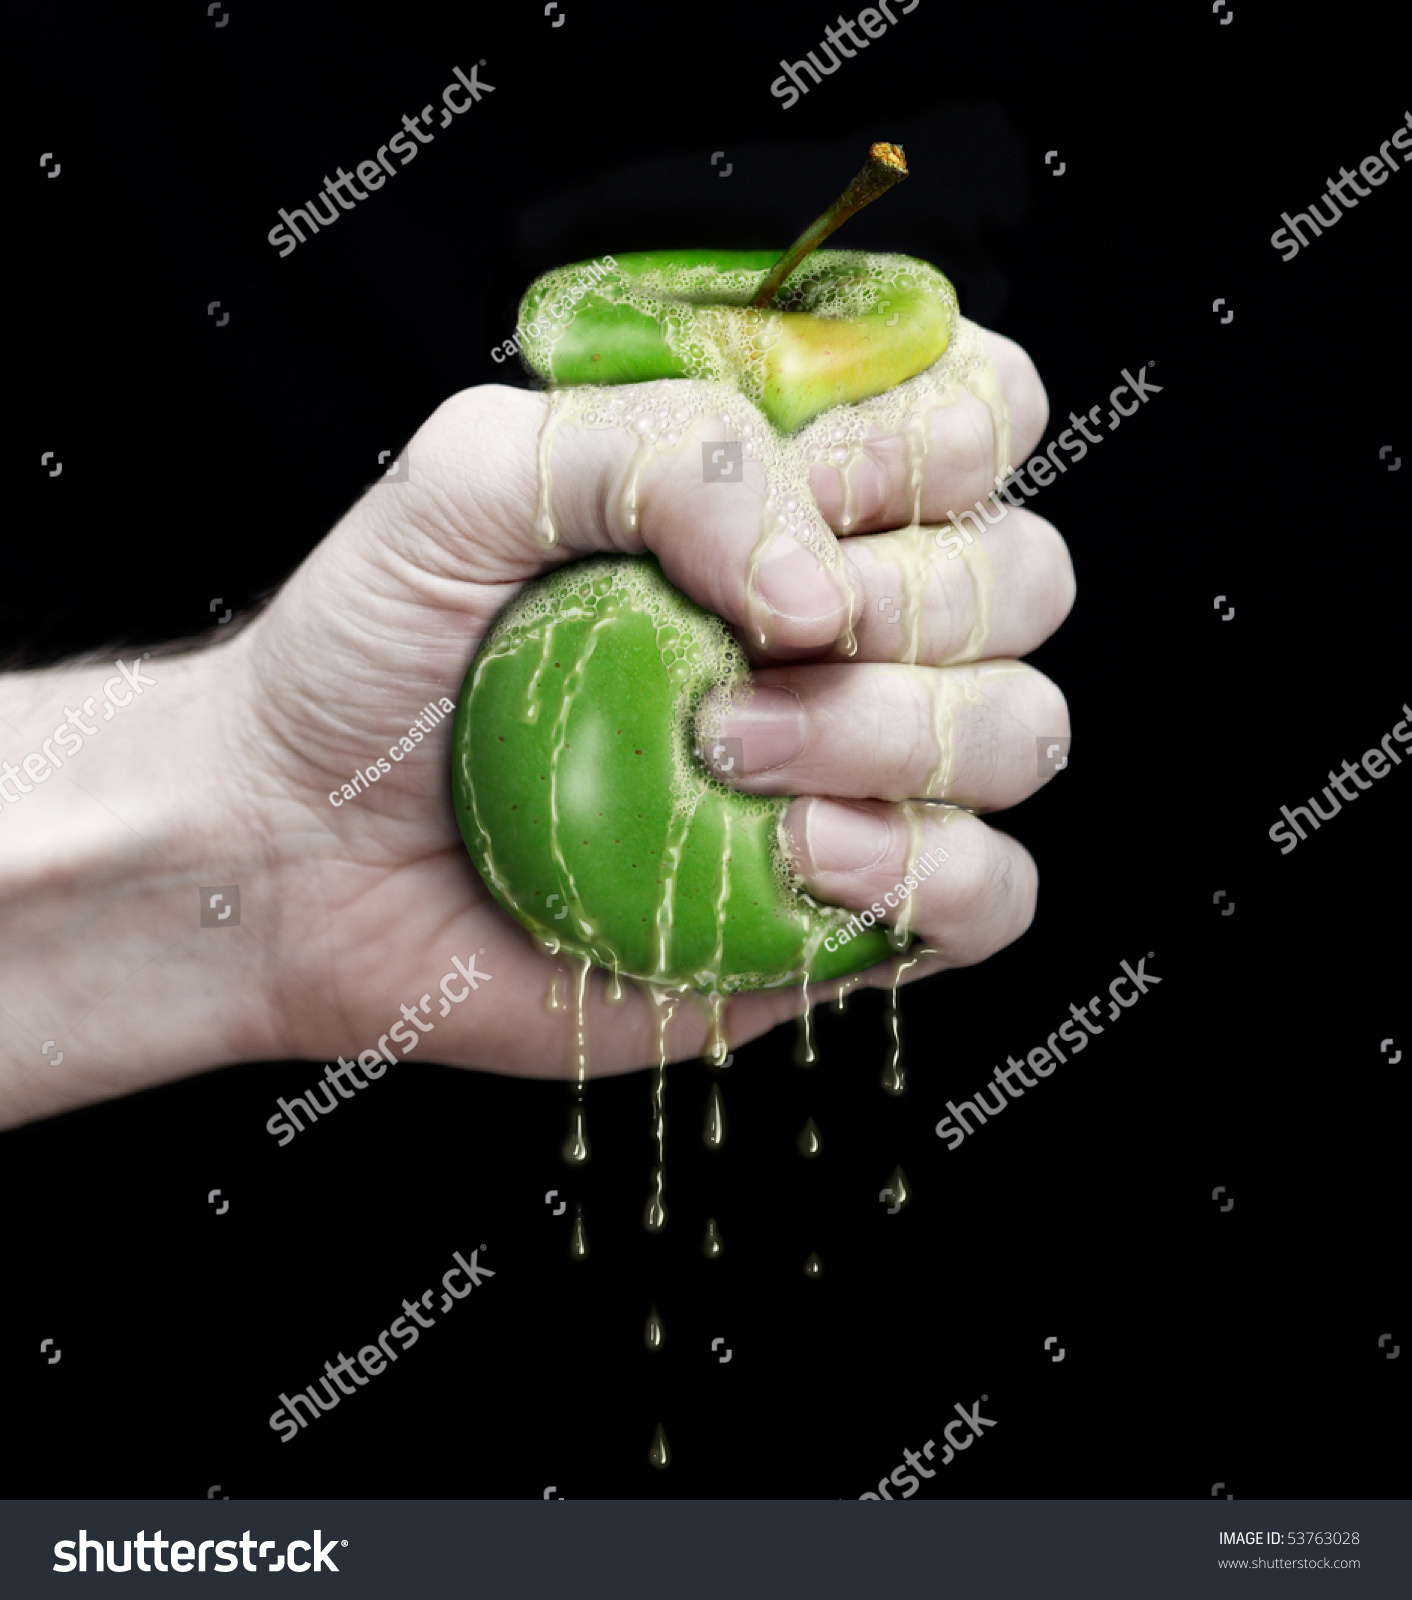 ana toscano reccomend crush apple with hand pic